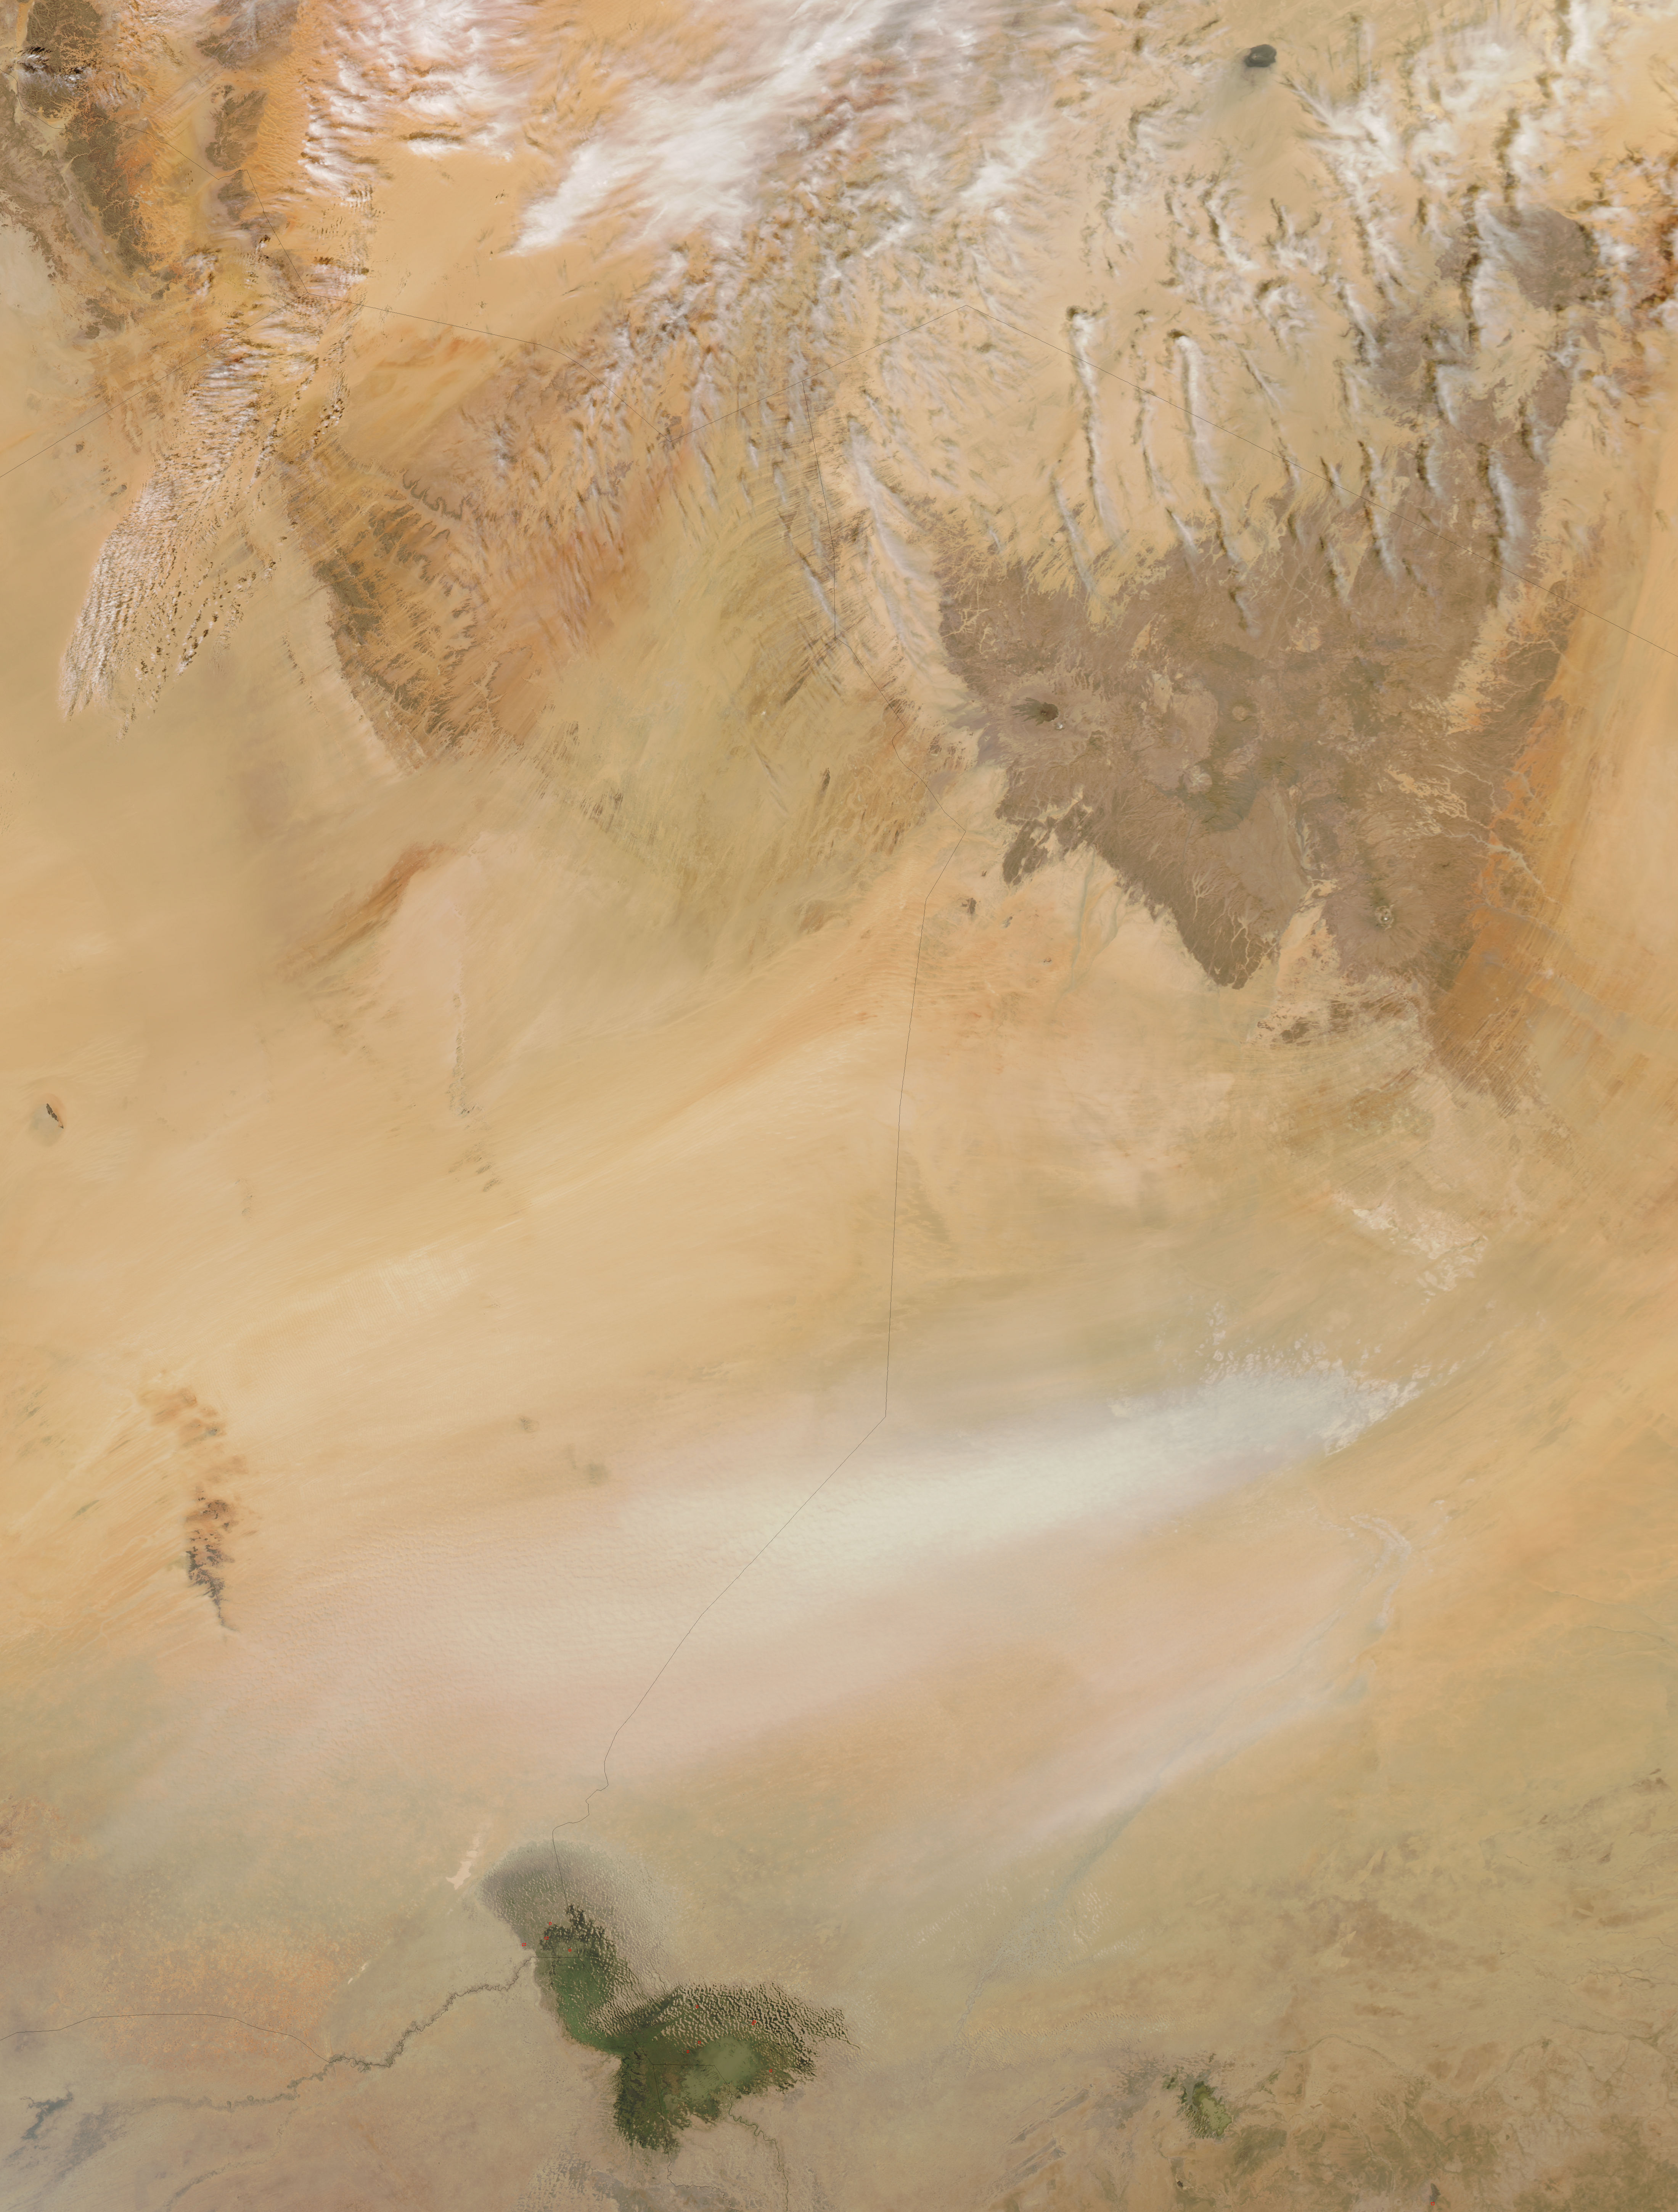 Bodele Depression Dust Storm, Lake Chad Fires - related image preview